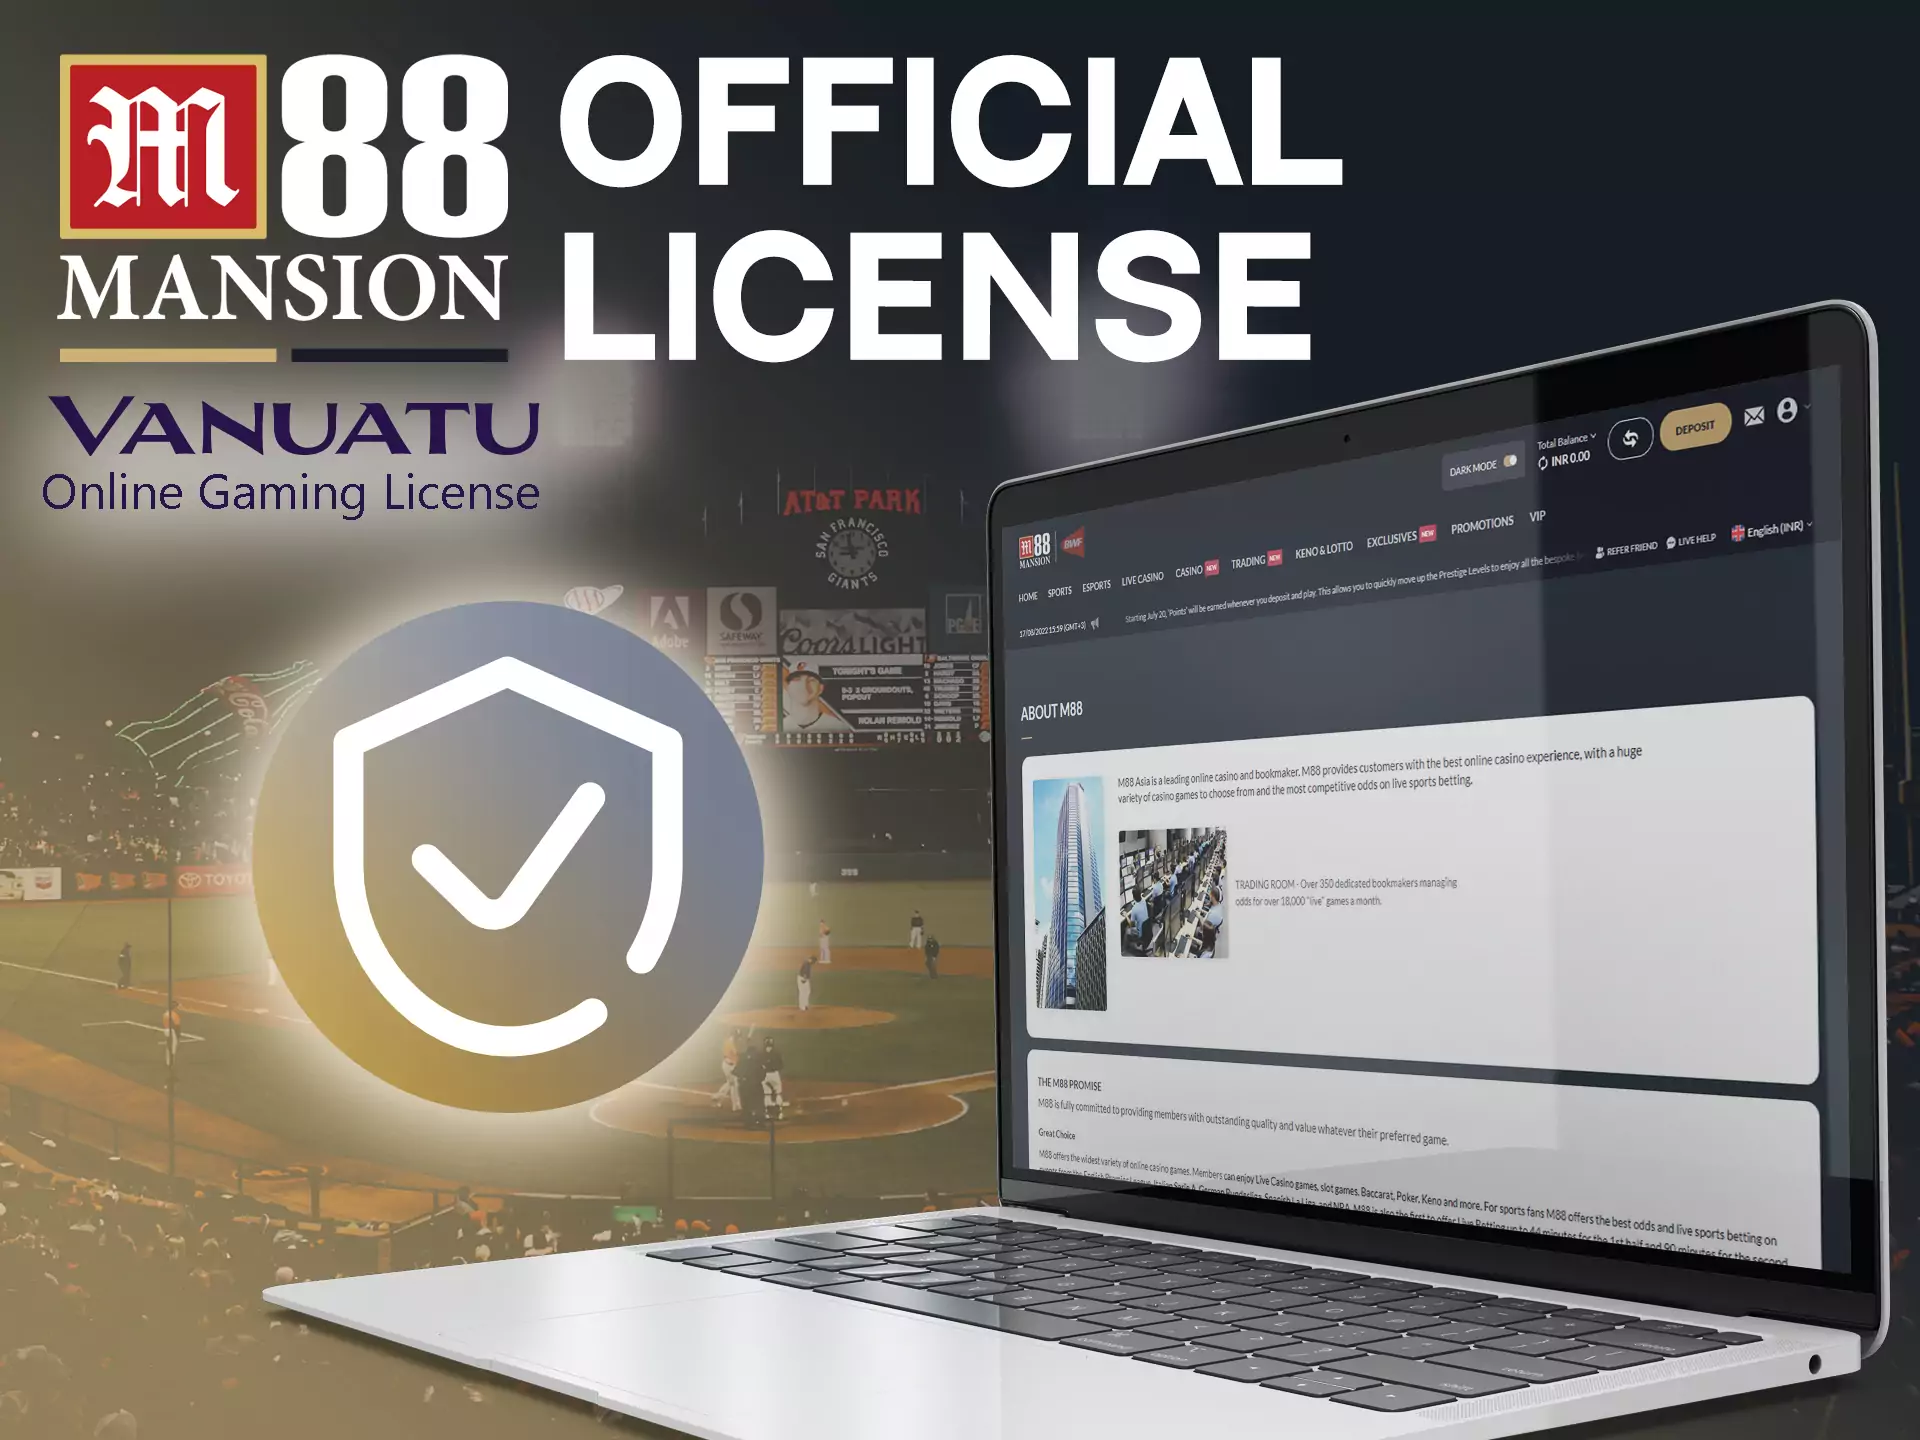 The M88 website works officially and legally thanking the Vanuatu Online Gaming license.